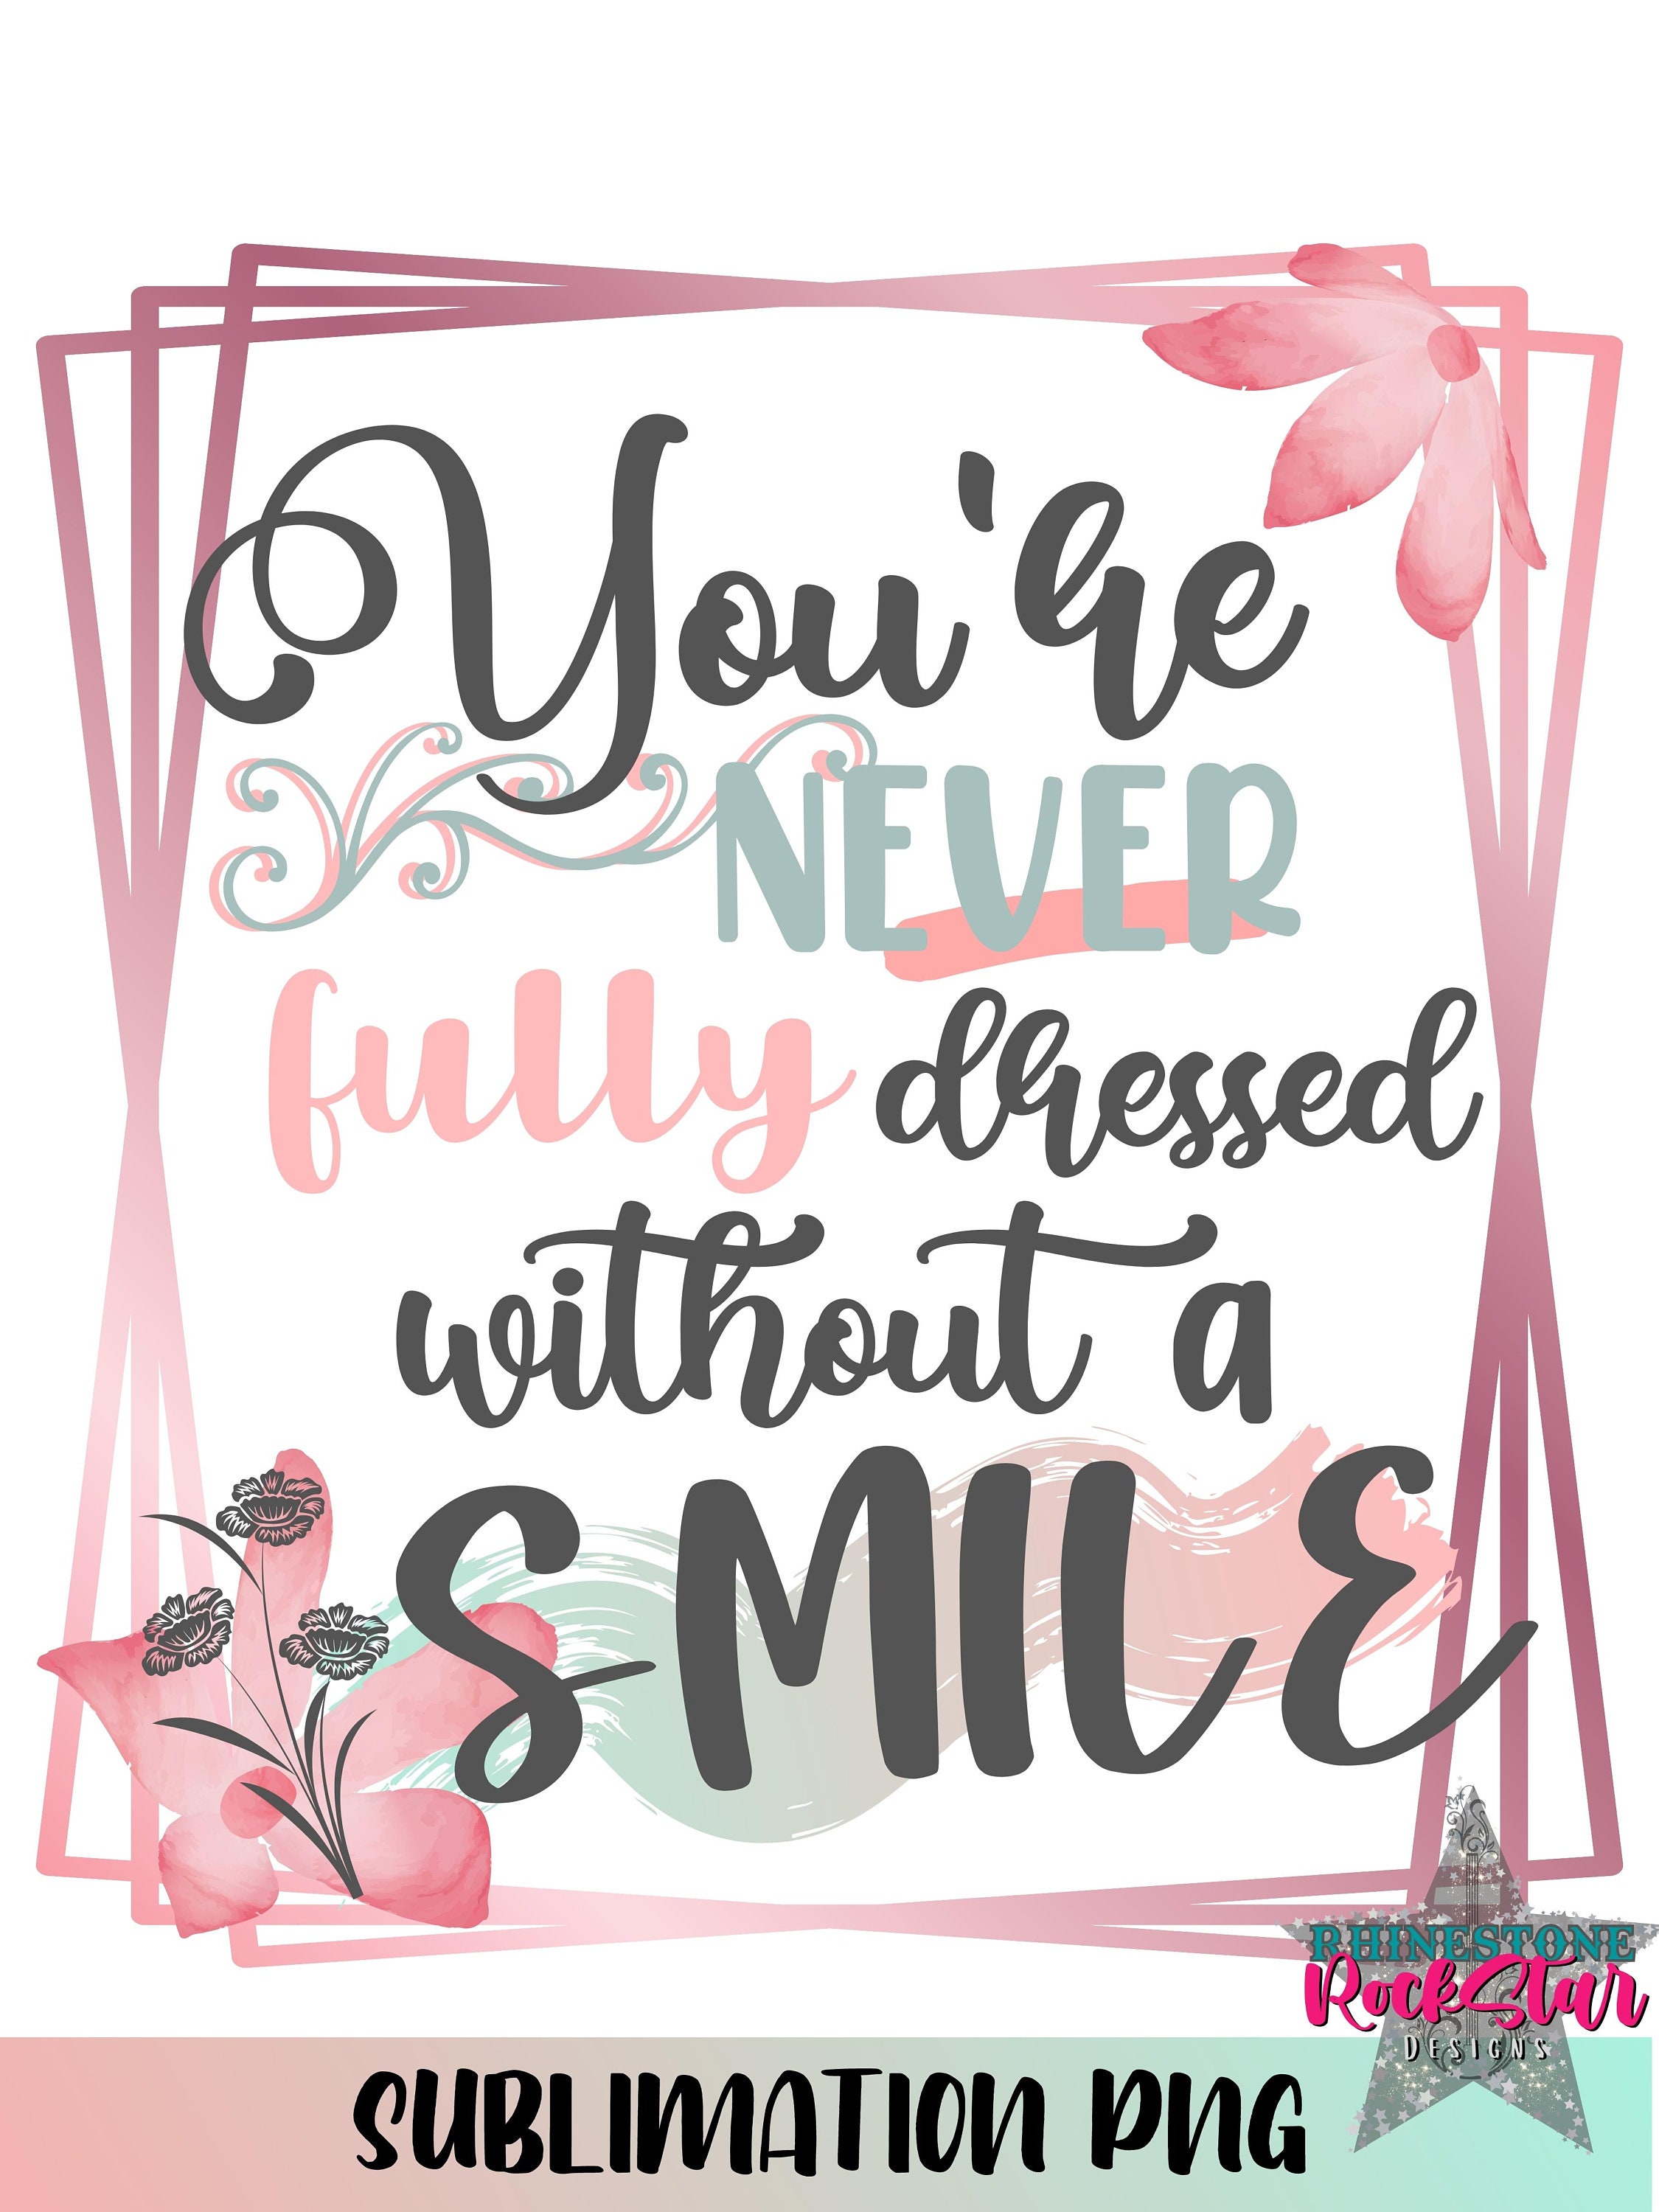 You're Never Fully Dressed Without A Smile | Bathroom Wall Decal